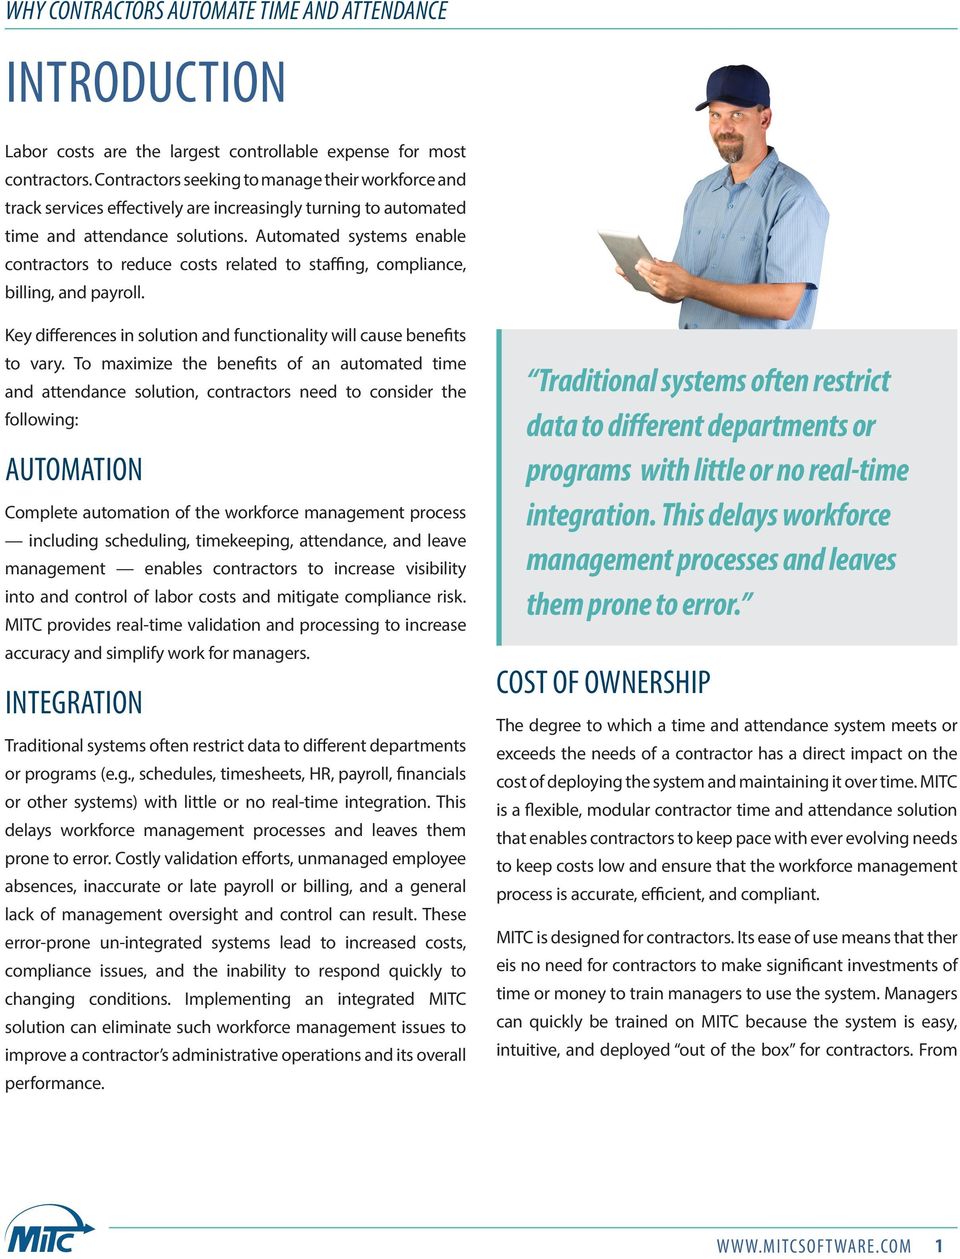 Automated systems enable contractors to reduce costs related to staffing, compliance, billing, and payroll. Key differences in solution and functionality will cause benefits to vary.